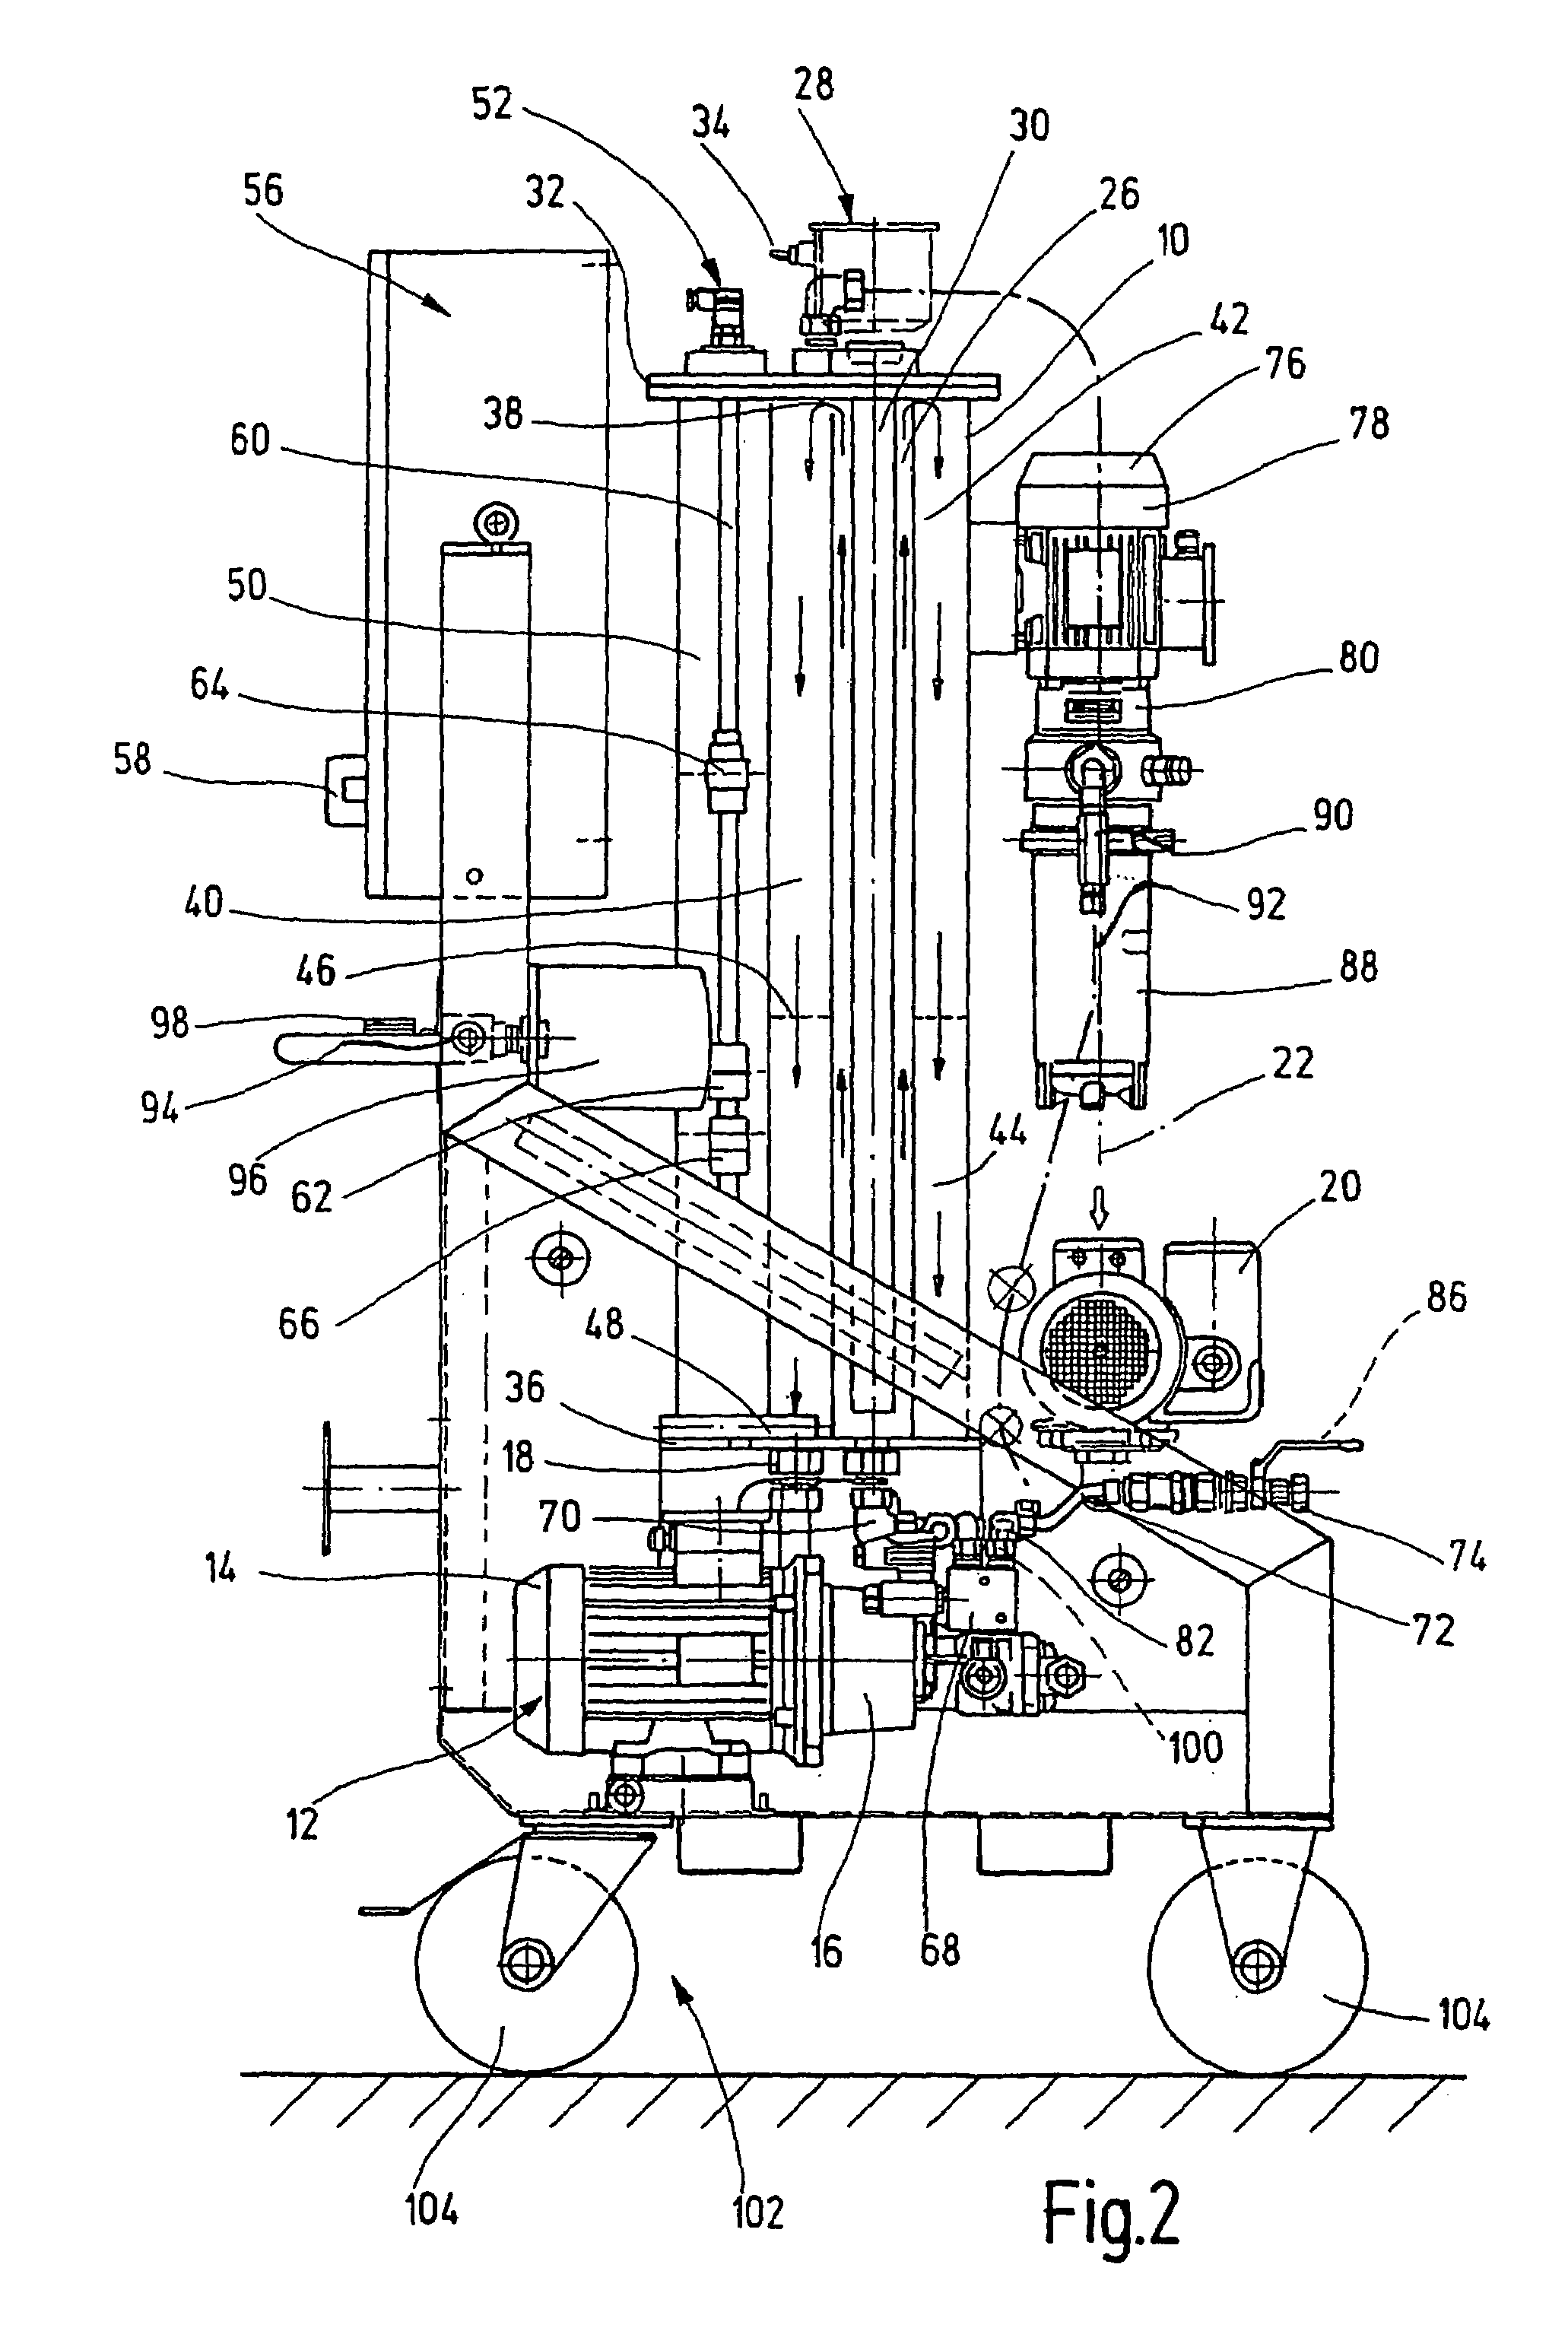 Device for separating fluid mixtures